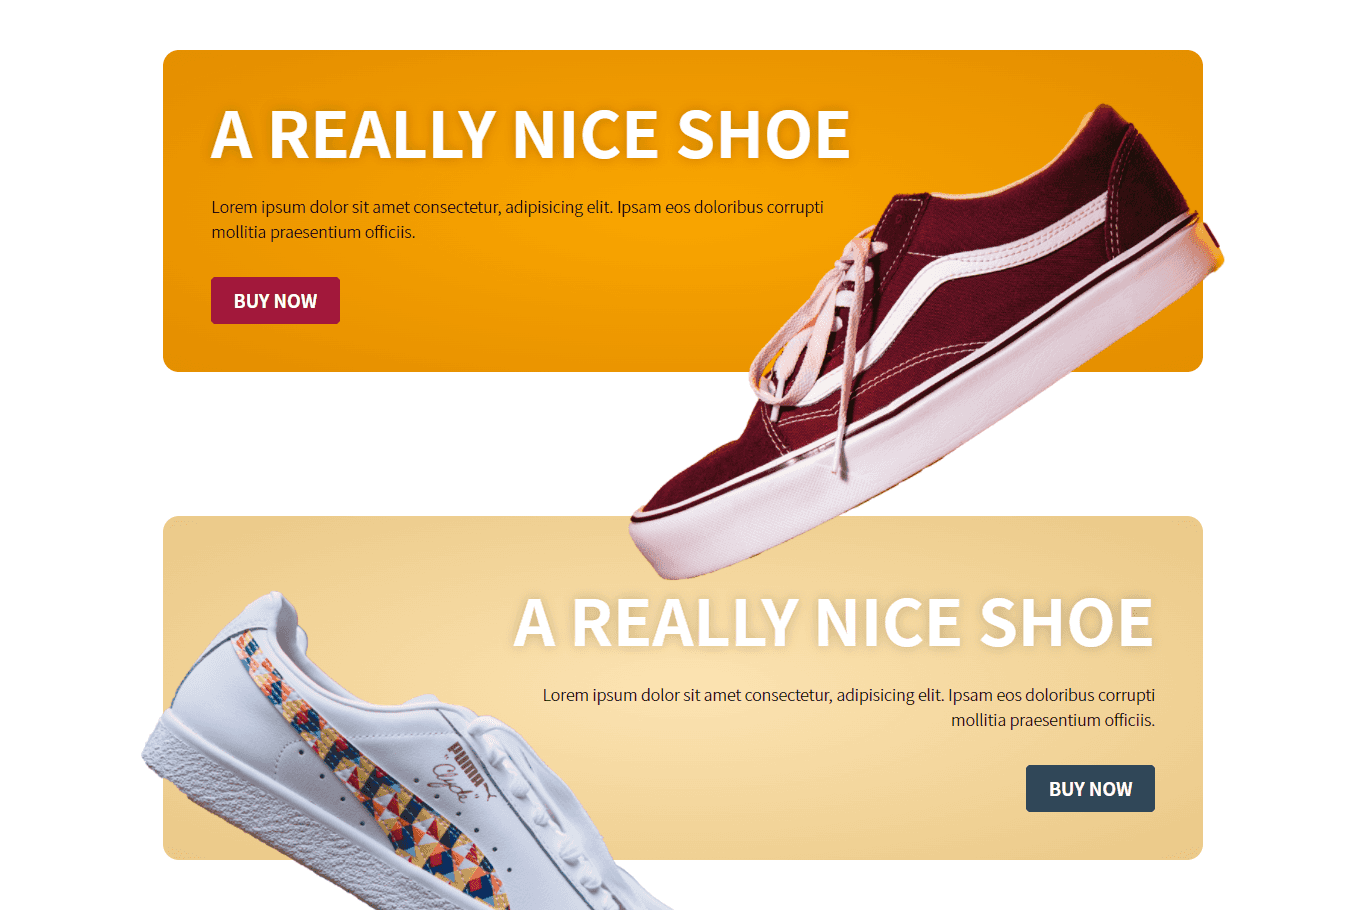 Great Shoes inc.